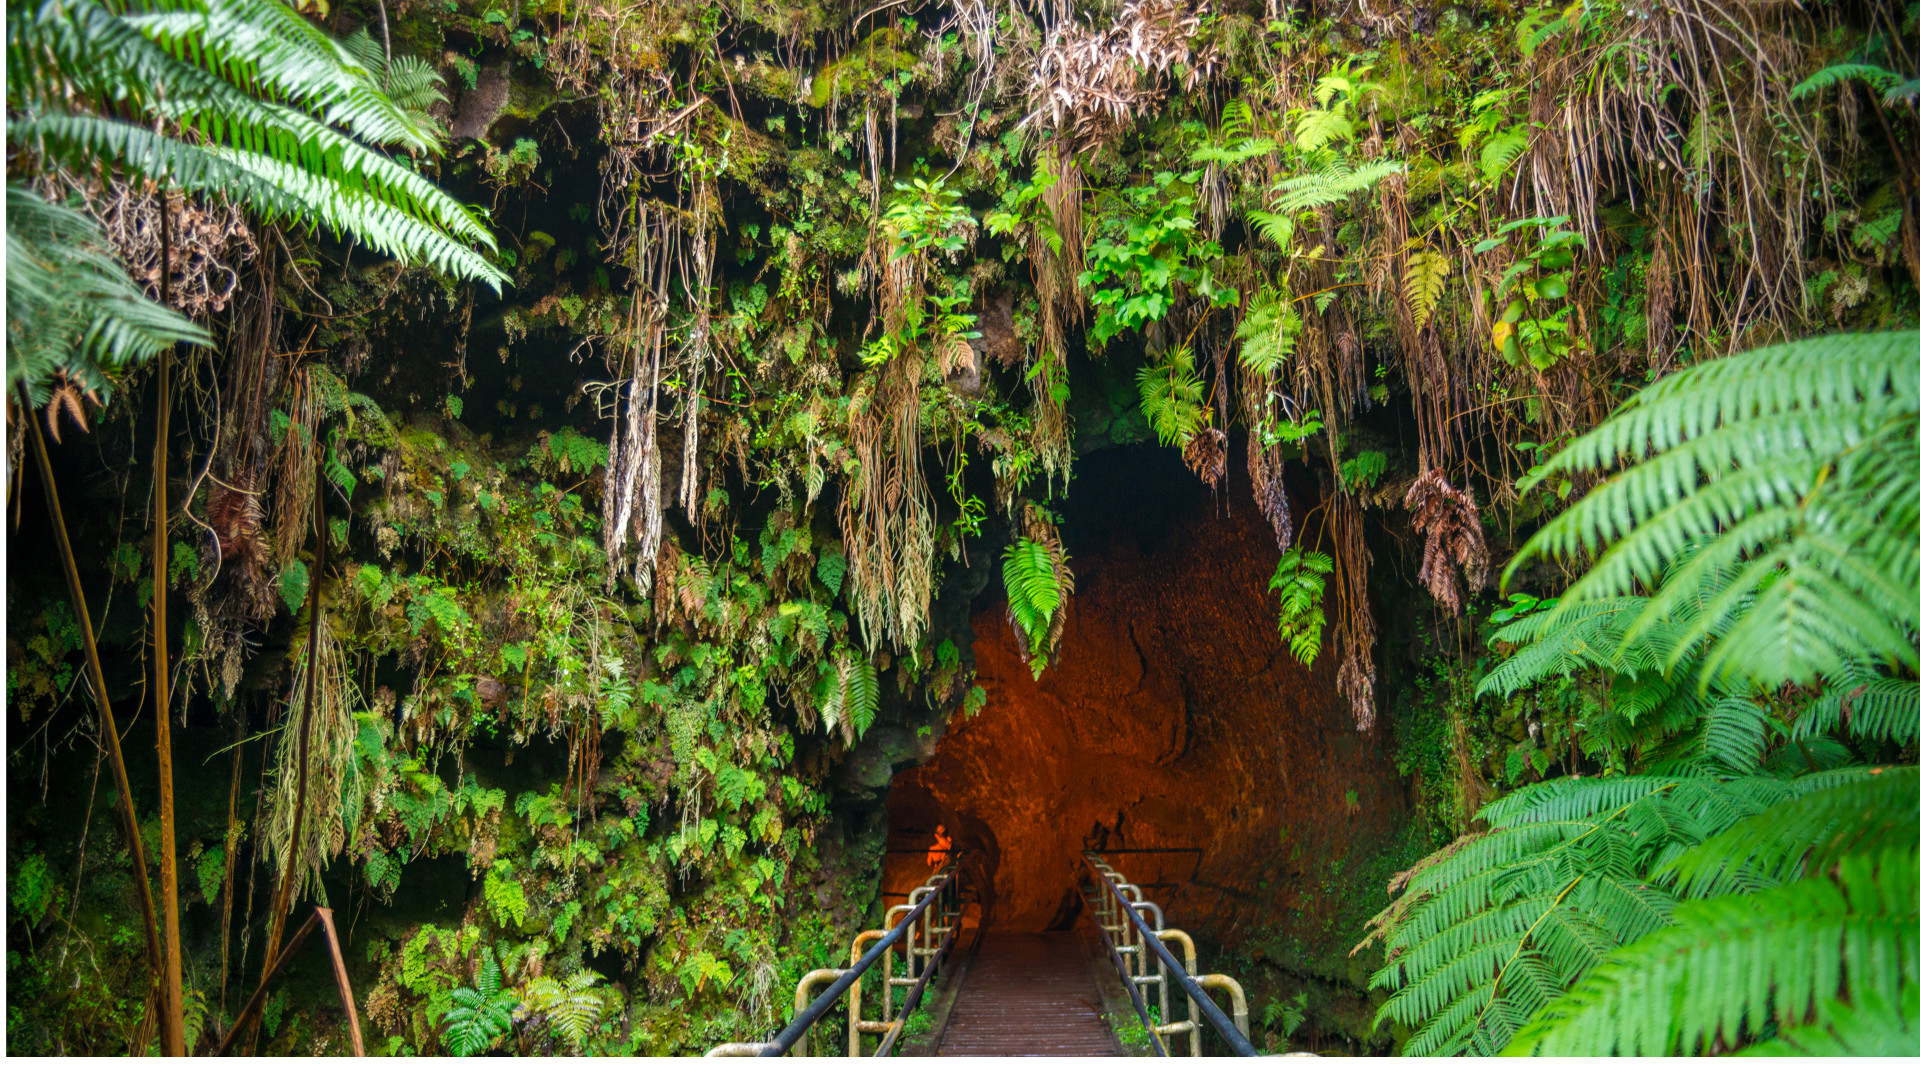 The park authorities hope to soon reopen the Thurston Lava Tube, where molten rock once flowed from the heart of the volcano to the ocean